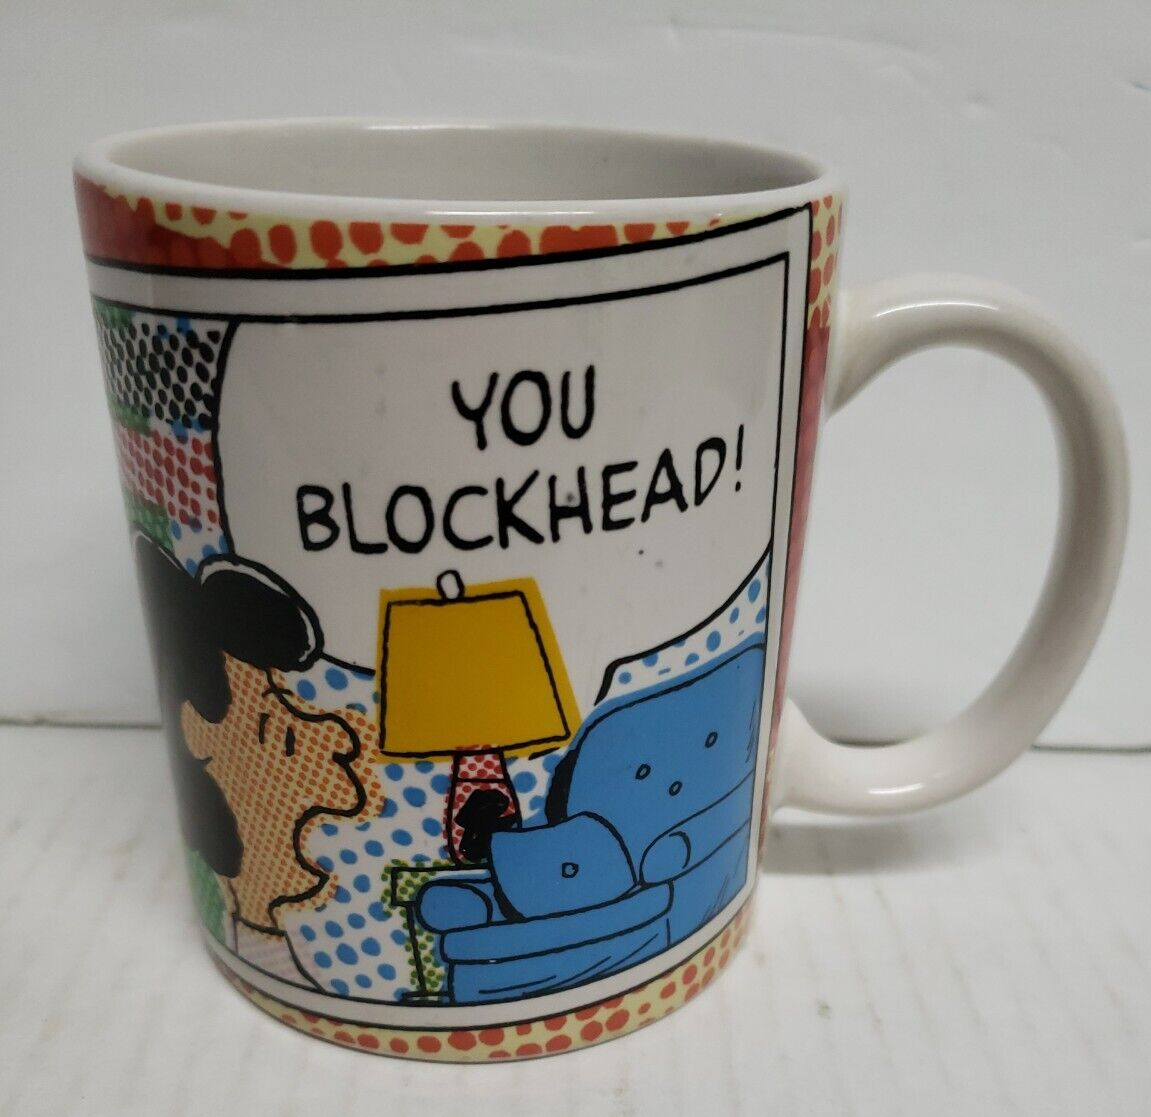 peanuts Lucy you blockhead by Gibson mug - $6.81